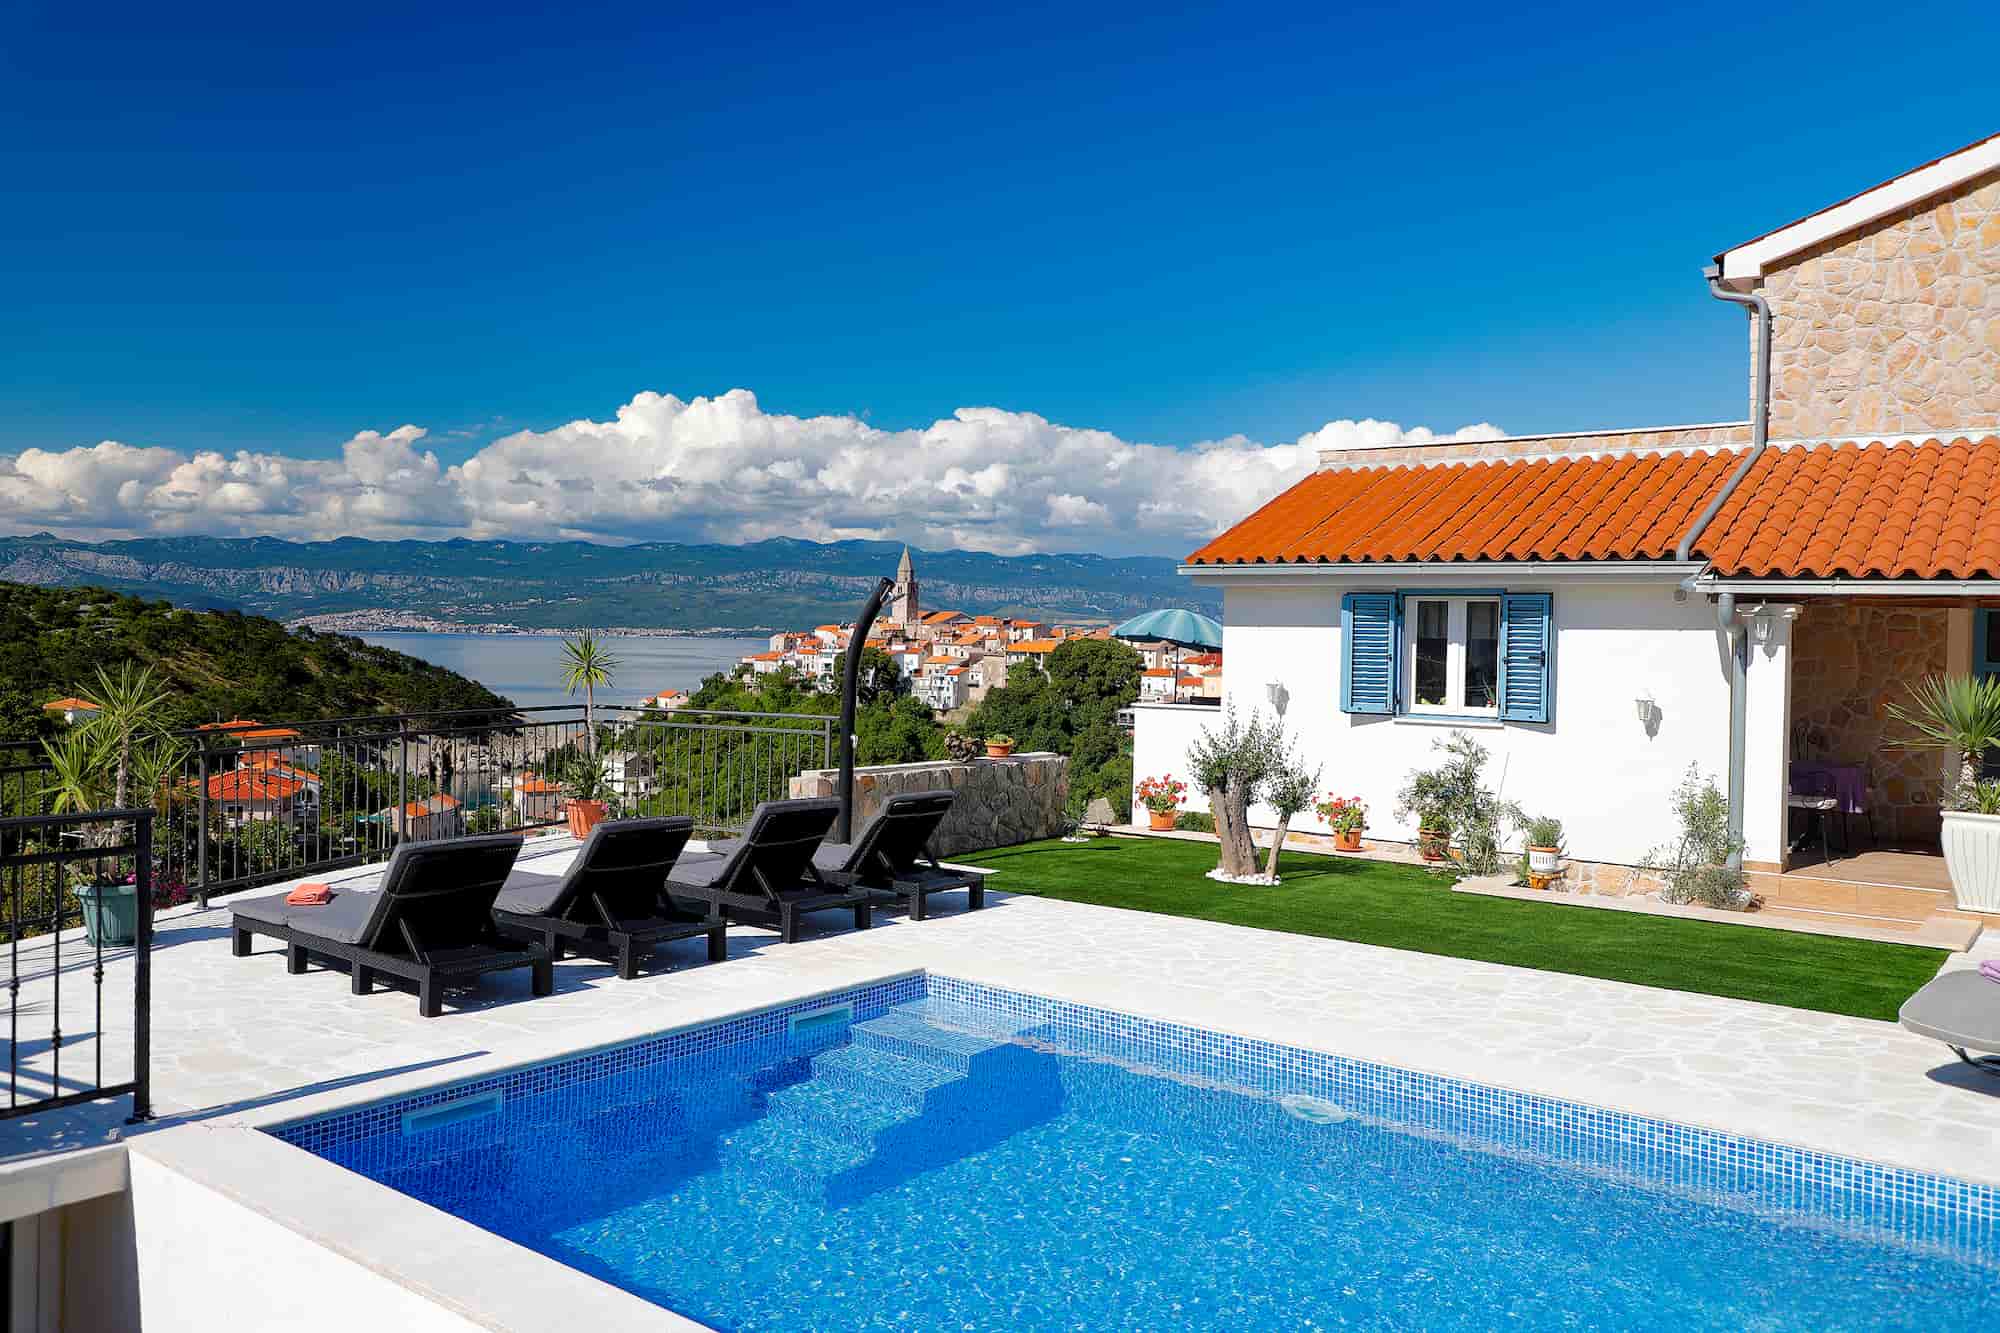 Romantic stone villa with pool, 700 m from the beach